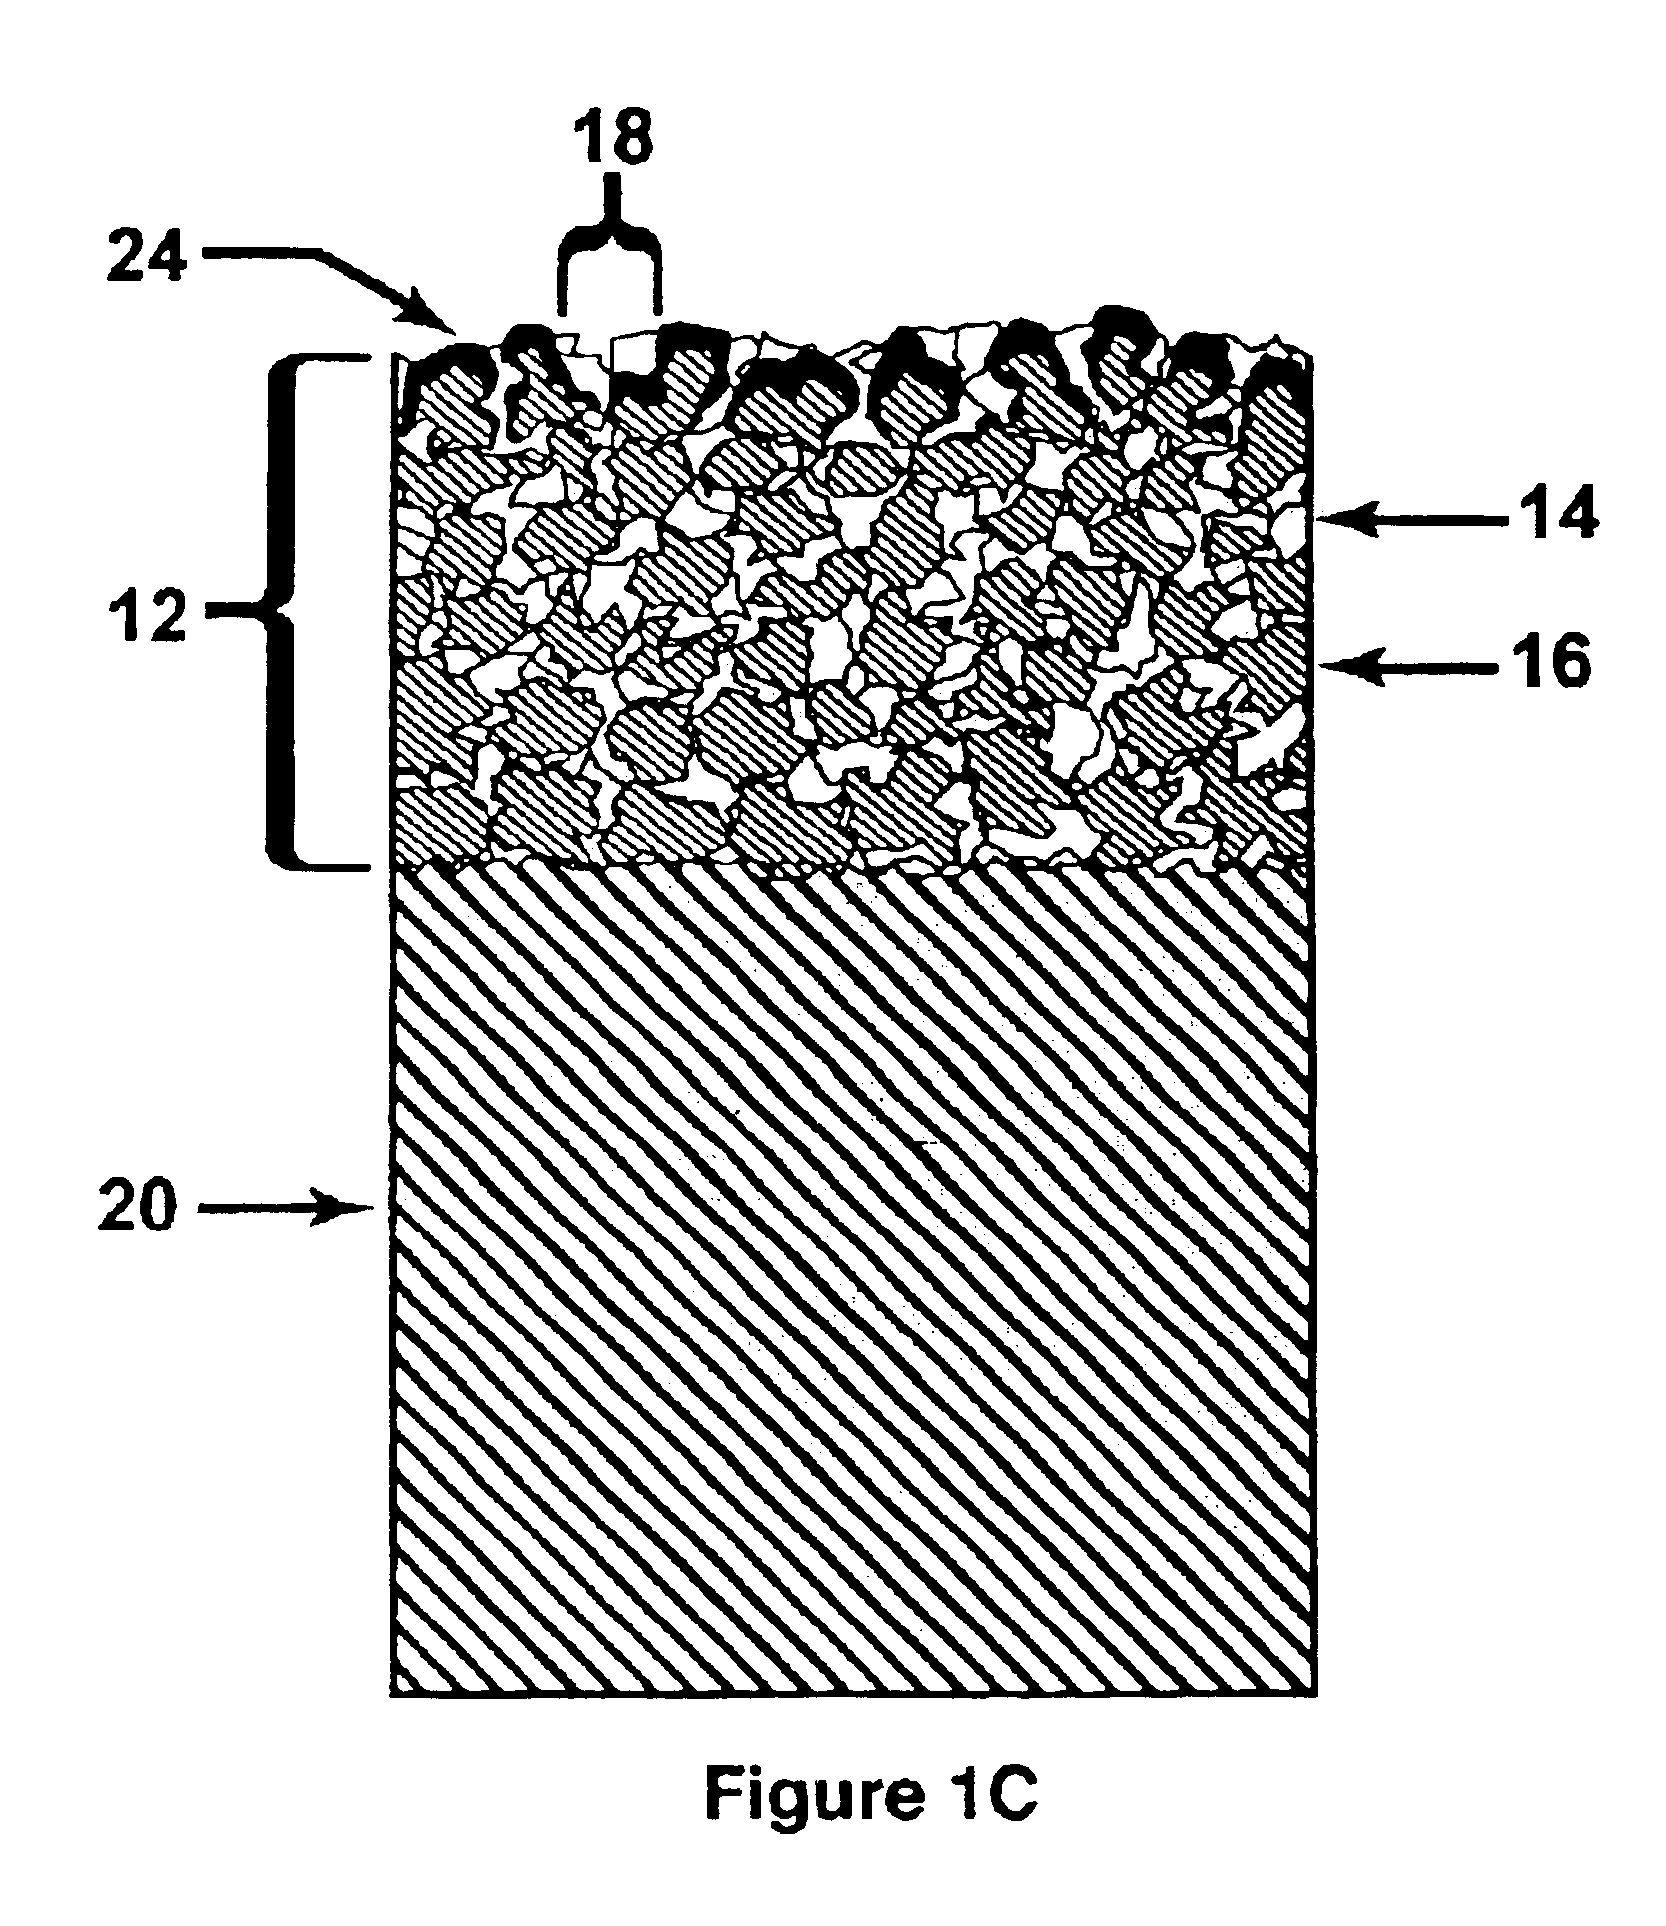 Process for forming a porous drug delivery layer